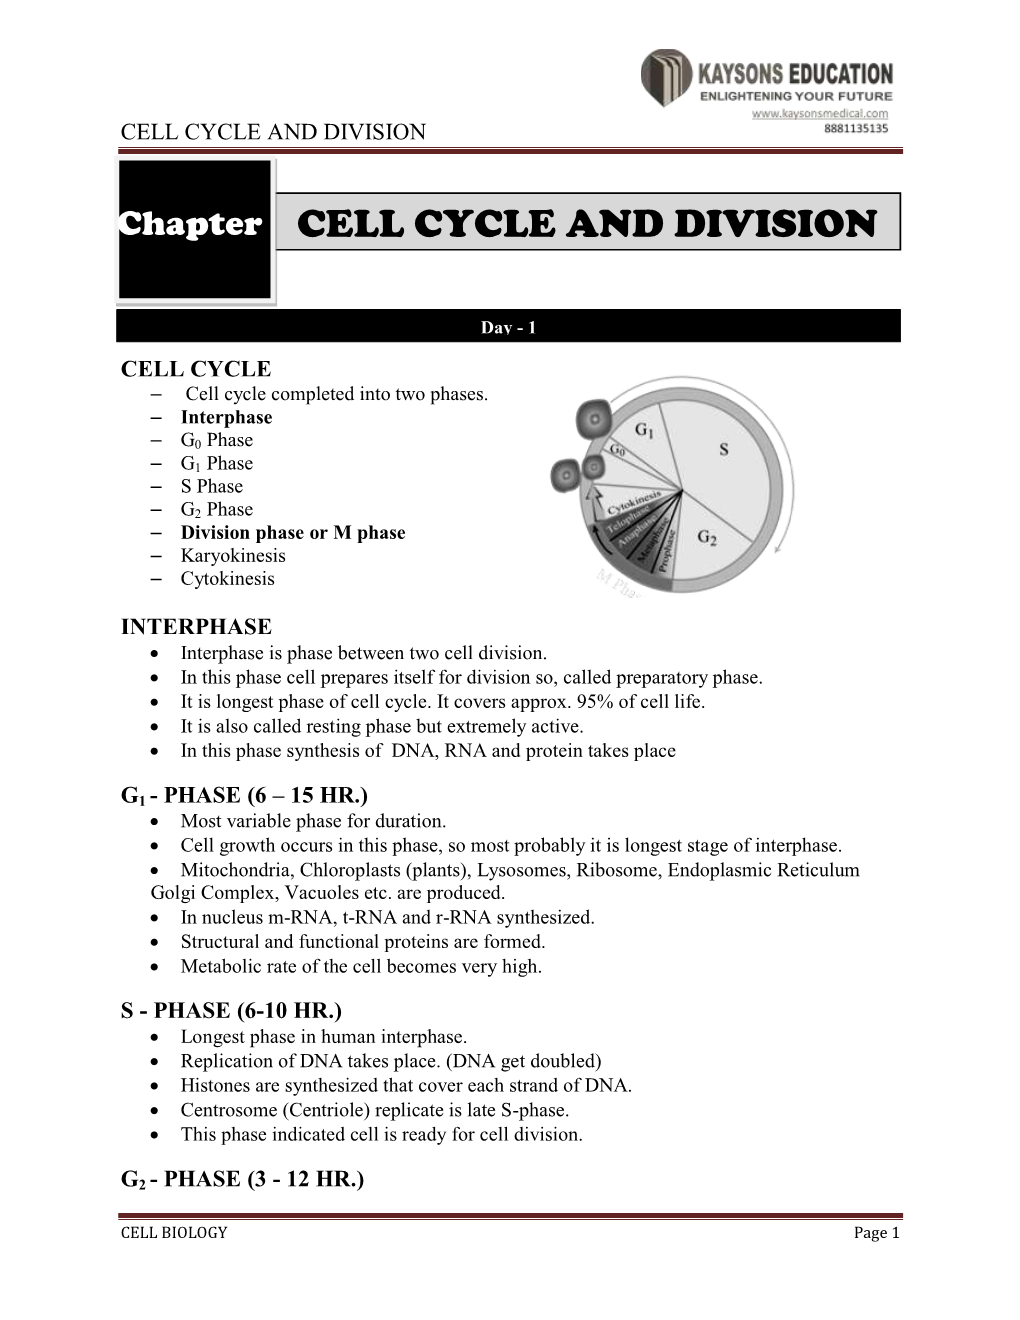 Cell Cycle and Division